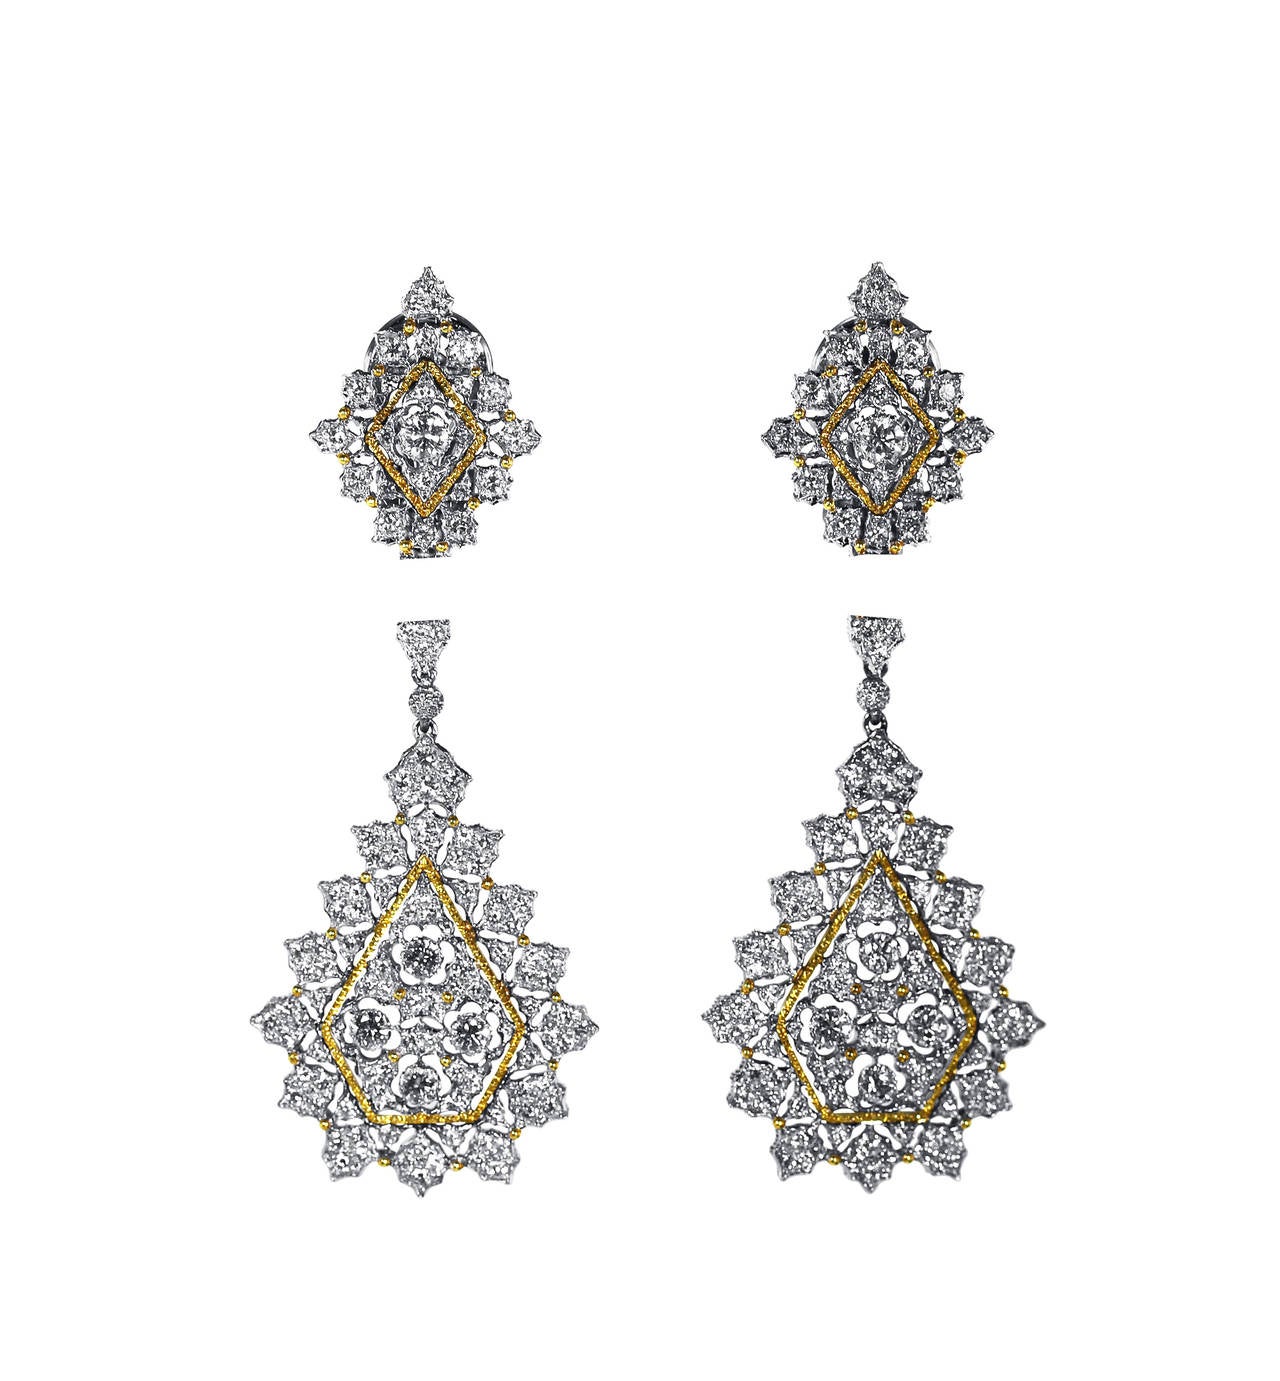 A pair of 18 karat white and yellow gold and diamond day and night pendant earclips by Buccellati, Italy, of honeycomb design set throughout with 246 round diamonds weighing approximately 4.00 carats, gross weight 19.5 grams, the pendants are